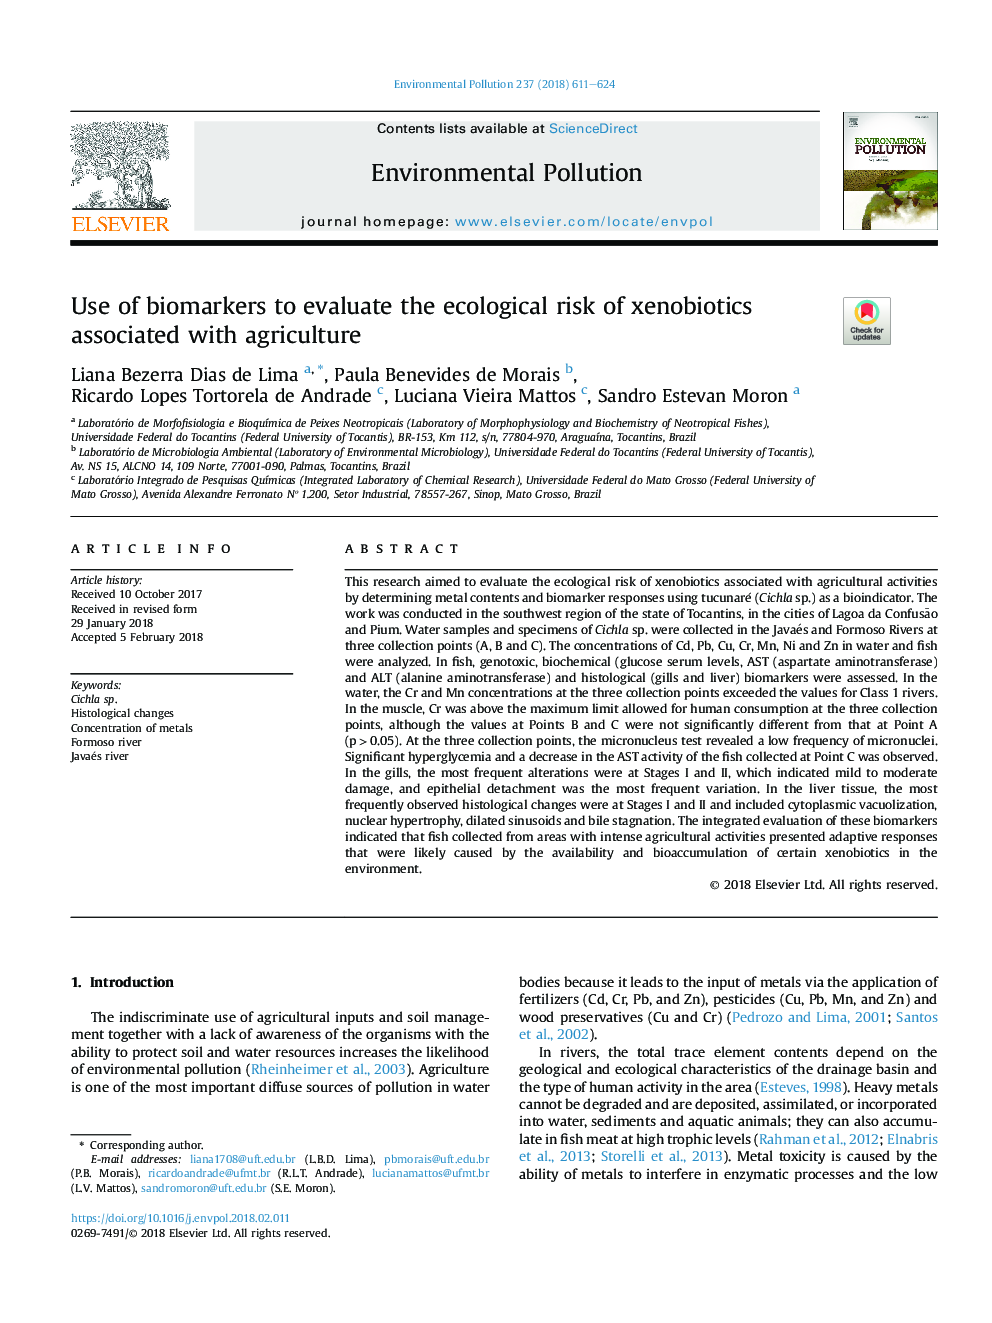 Use of biomarkers to evaluate the ecological risk of xenobiotics associated with agriculture